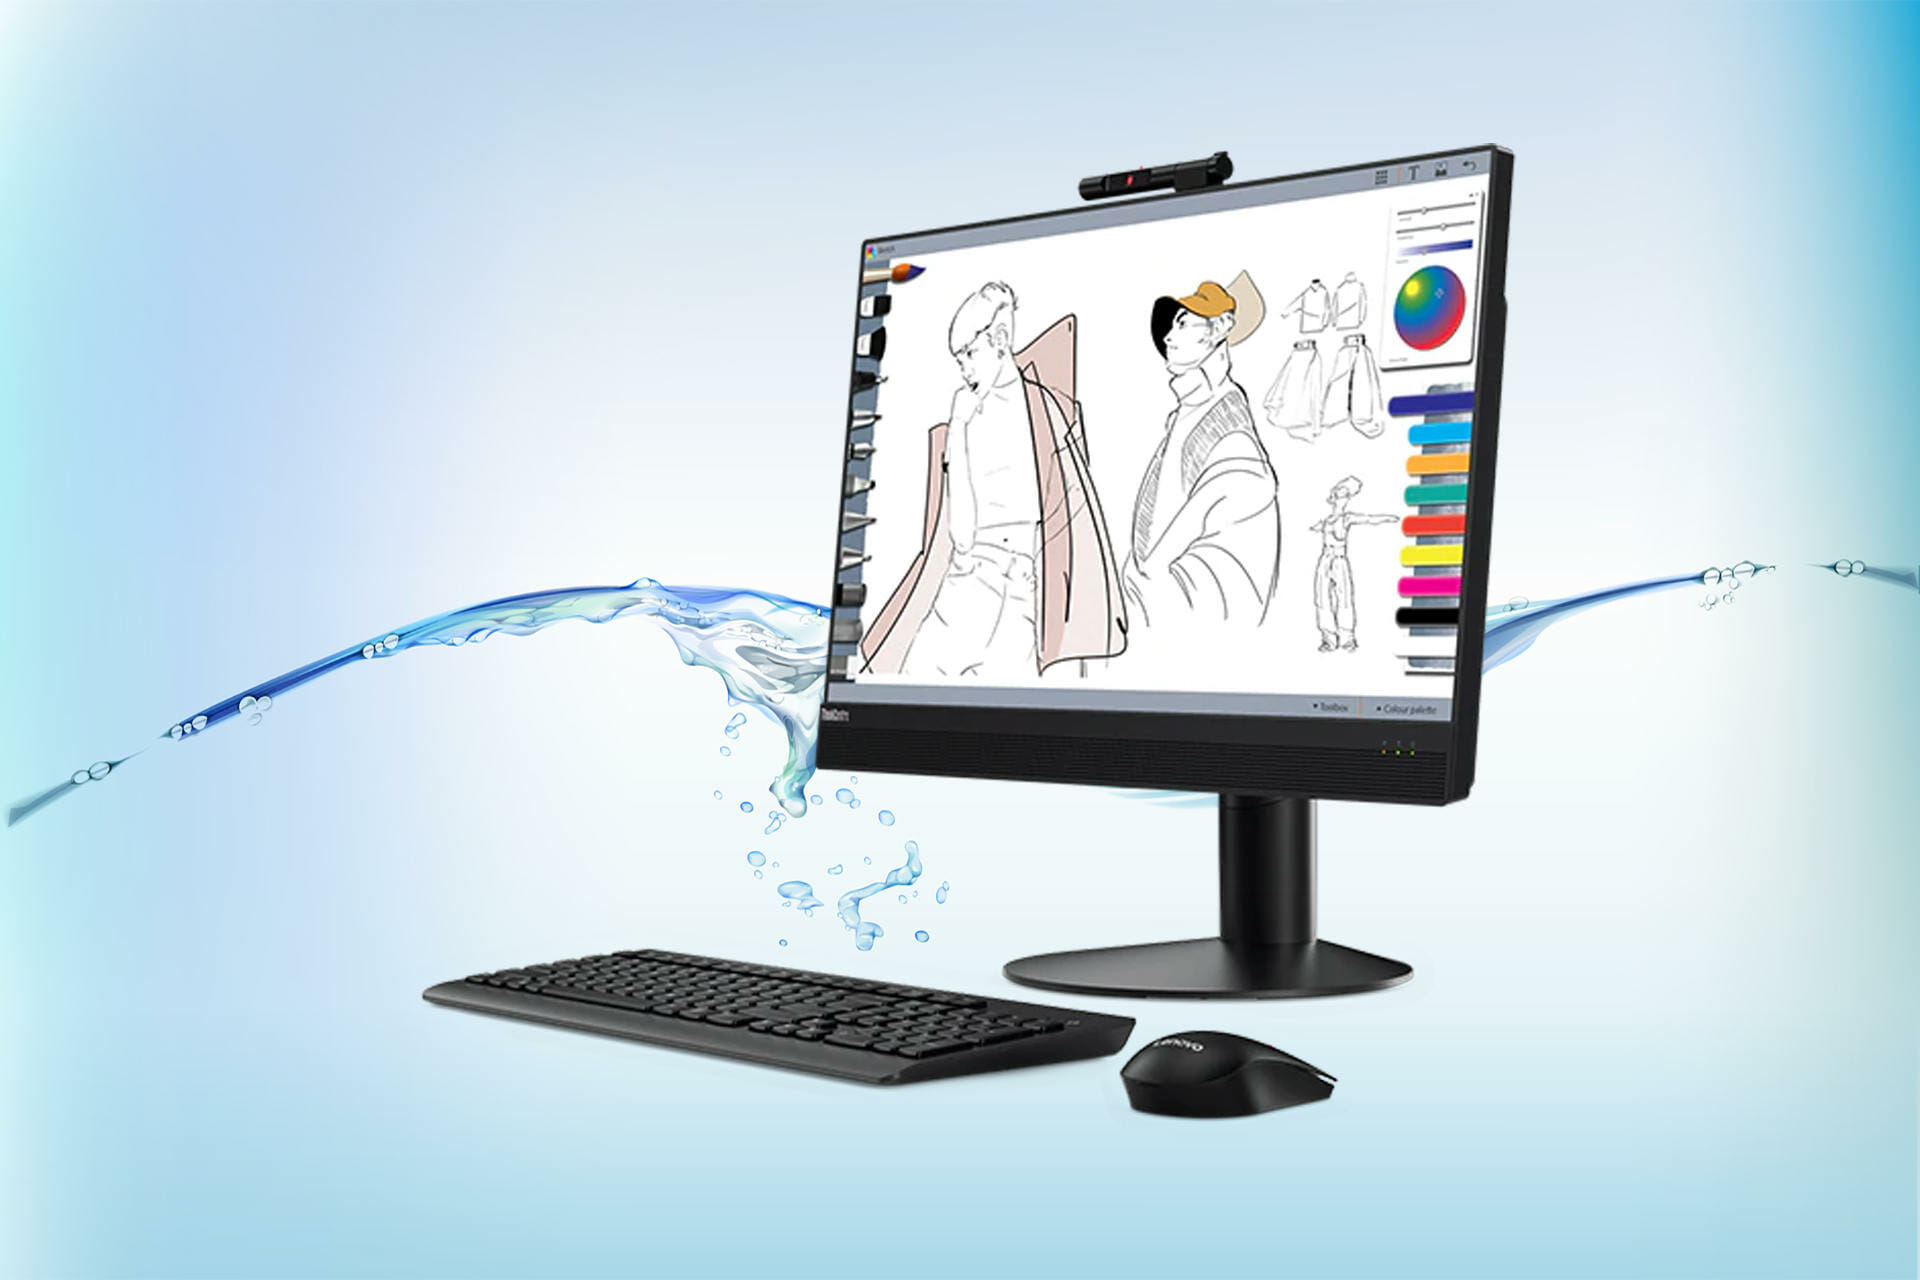 Get your Lenovo ThinkCentre M920z all-in-one PC now